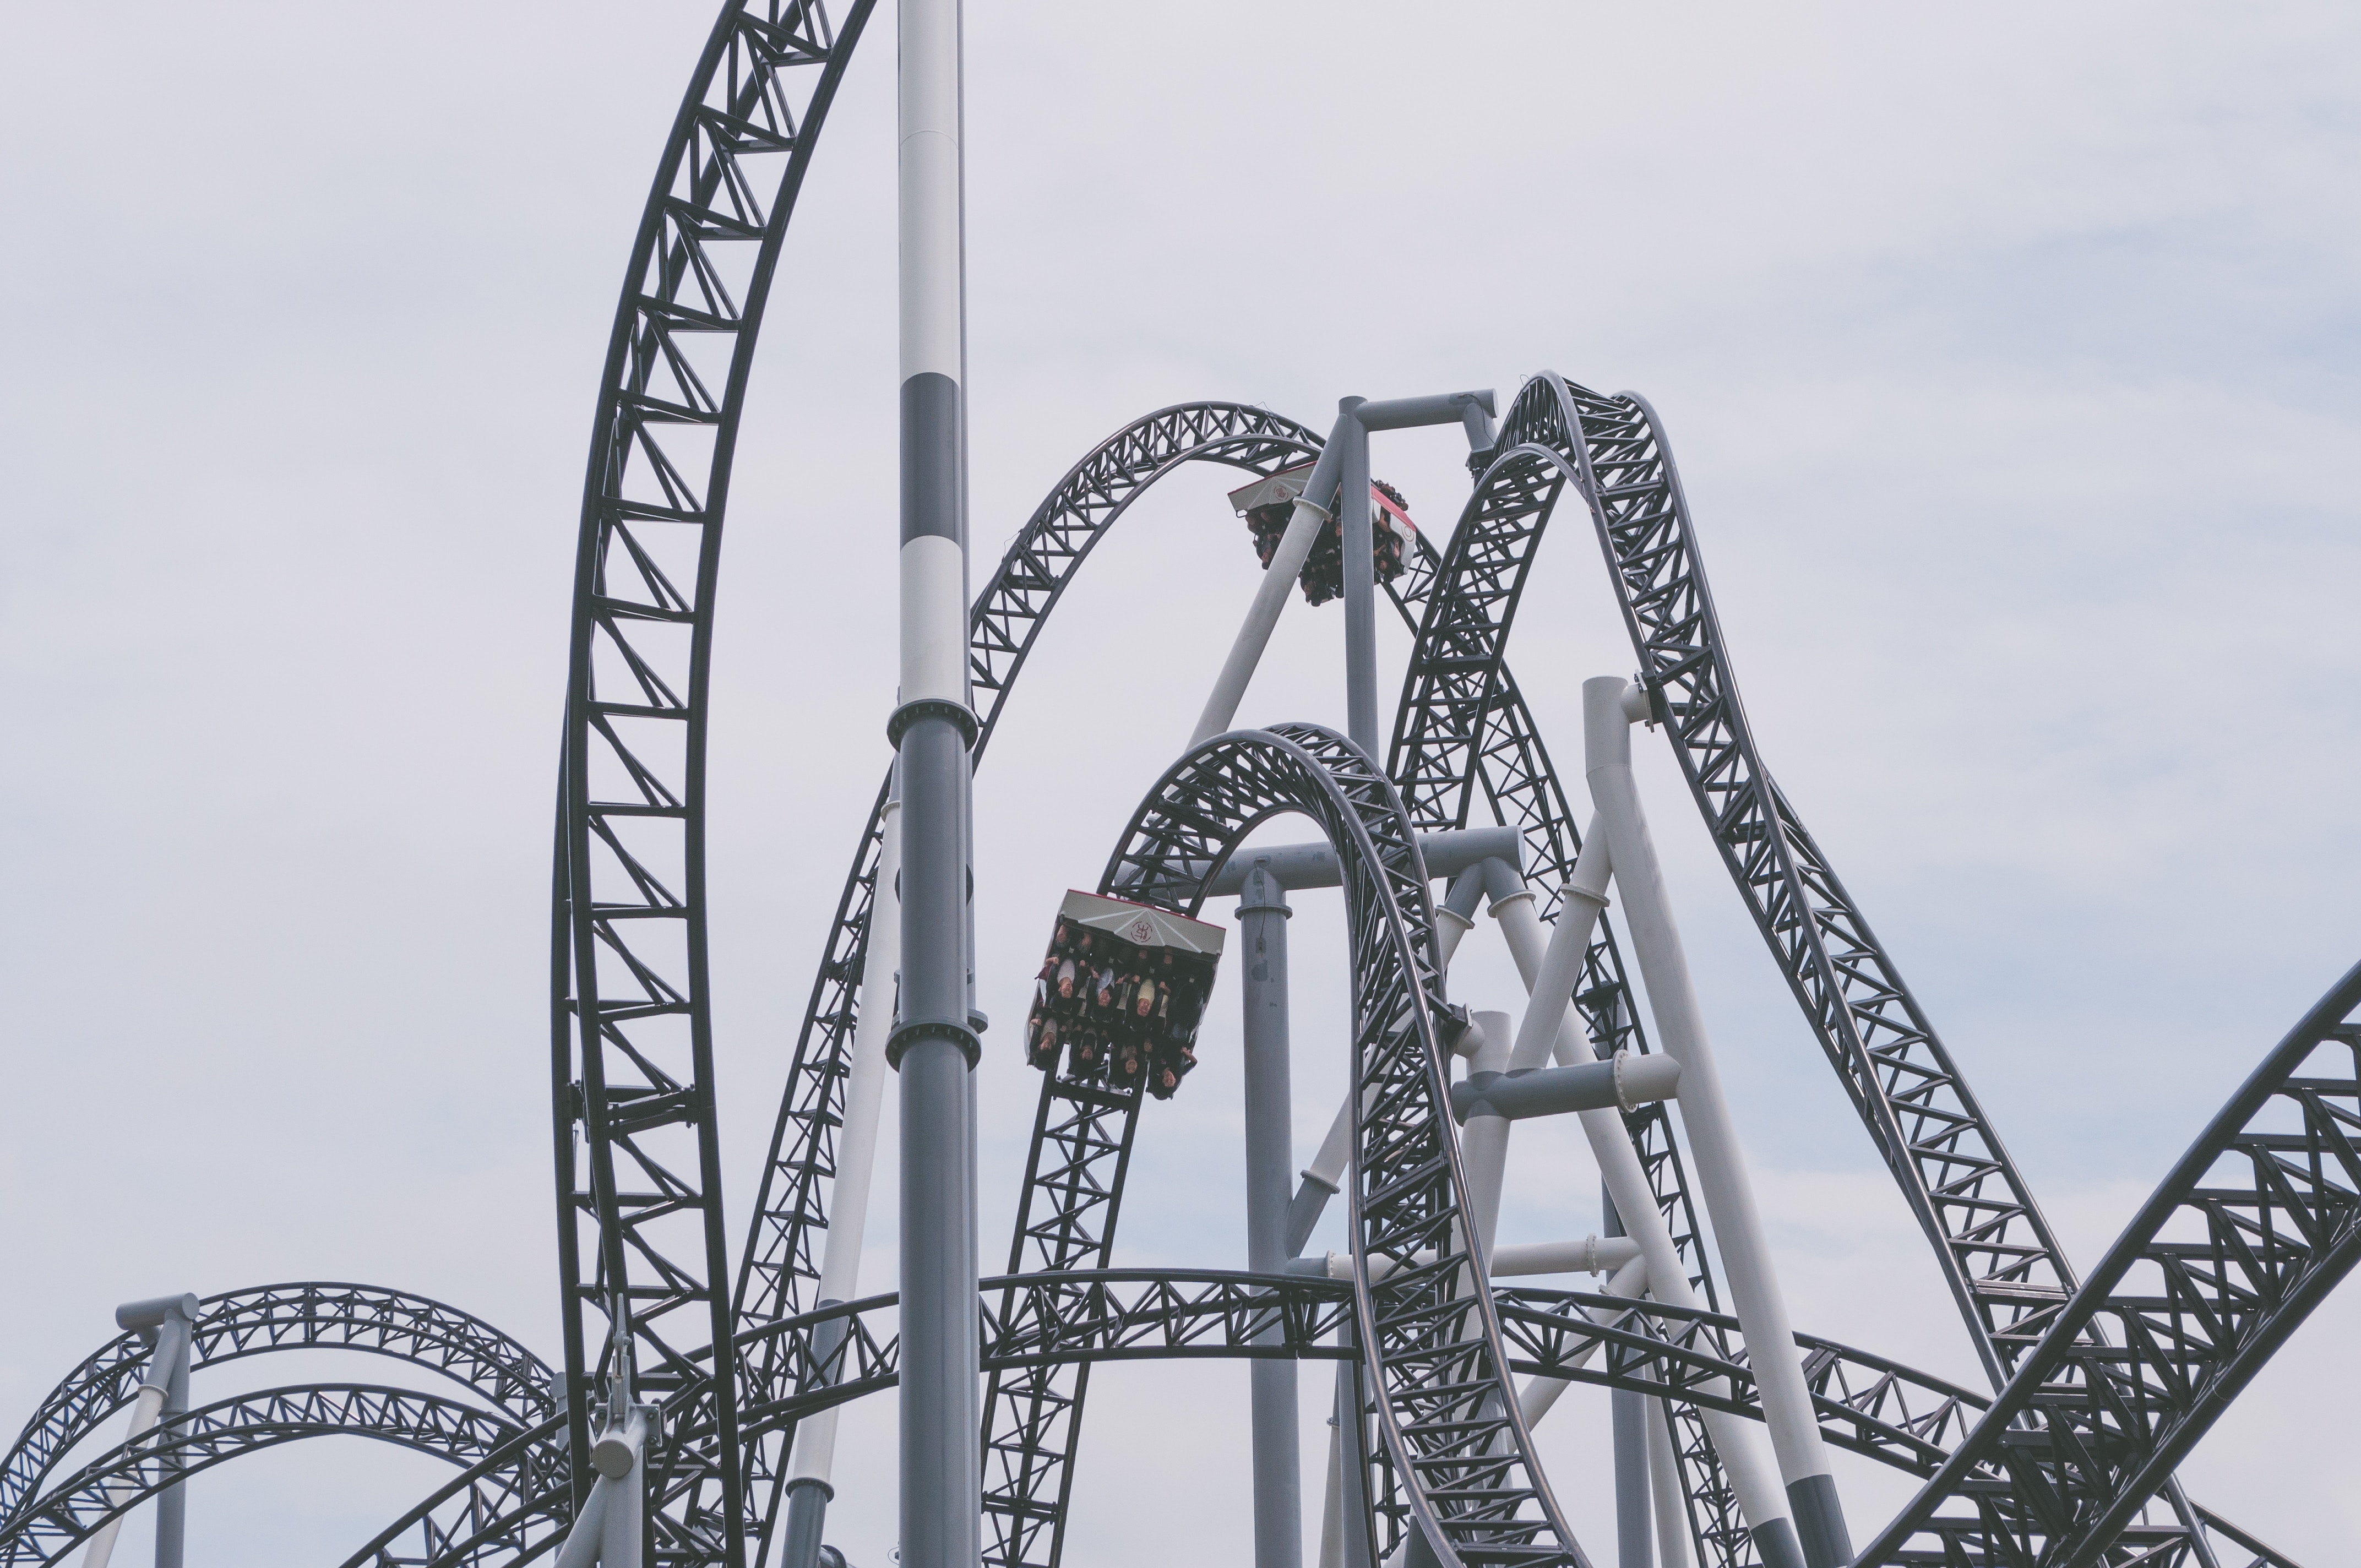 The depression roller coaster takes me by surprise every time. You can ride the incline for a day, weeks or even month, but when it drops you, you fall hard.